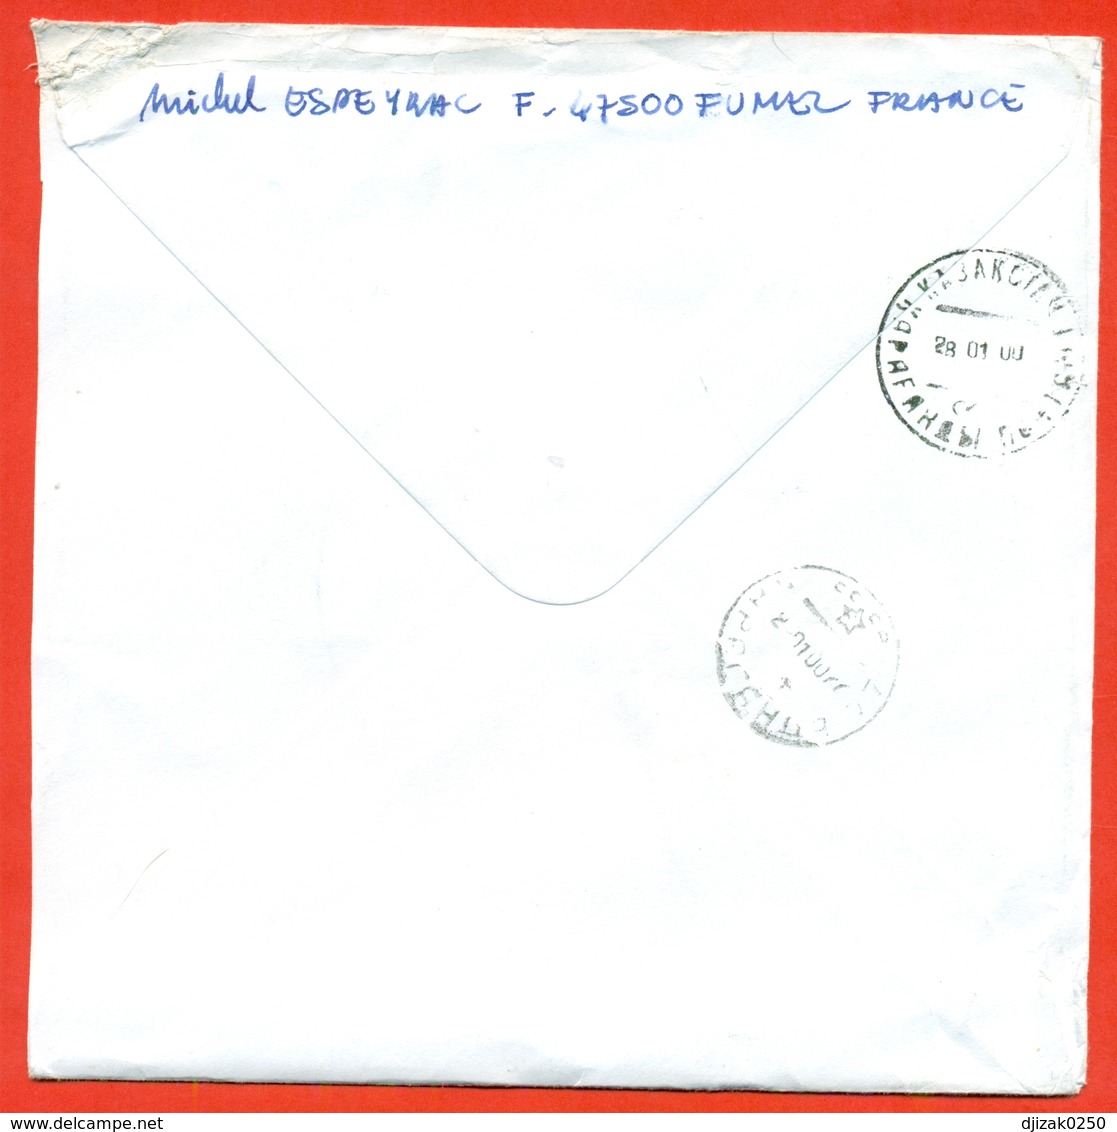 France 2000. New Year Stamp.The Envelope Is Really Past Mail. Special Blanking. - Covers & Documents